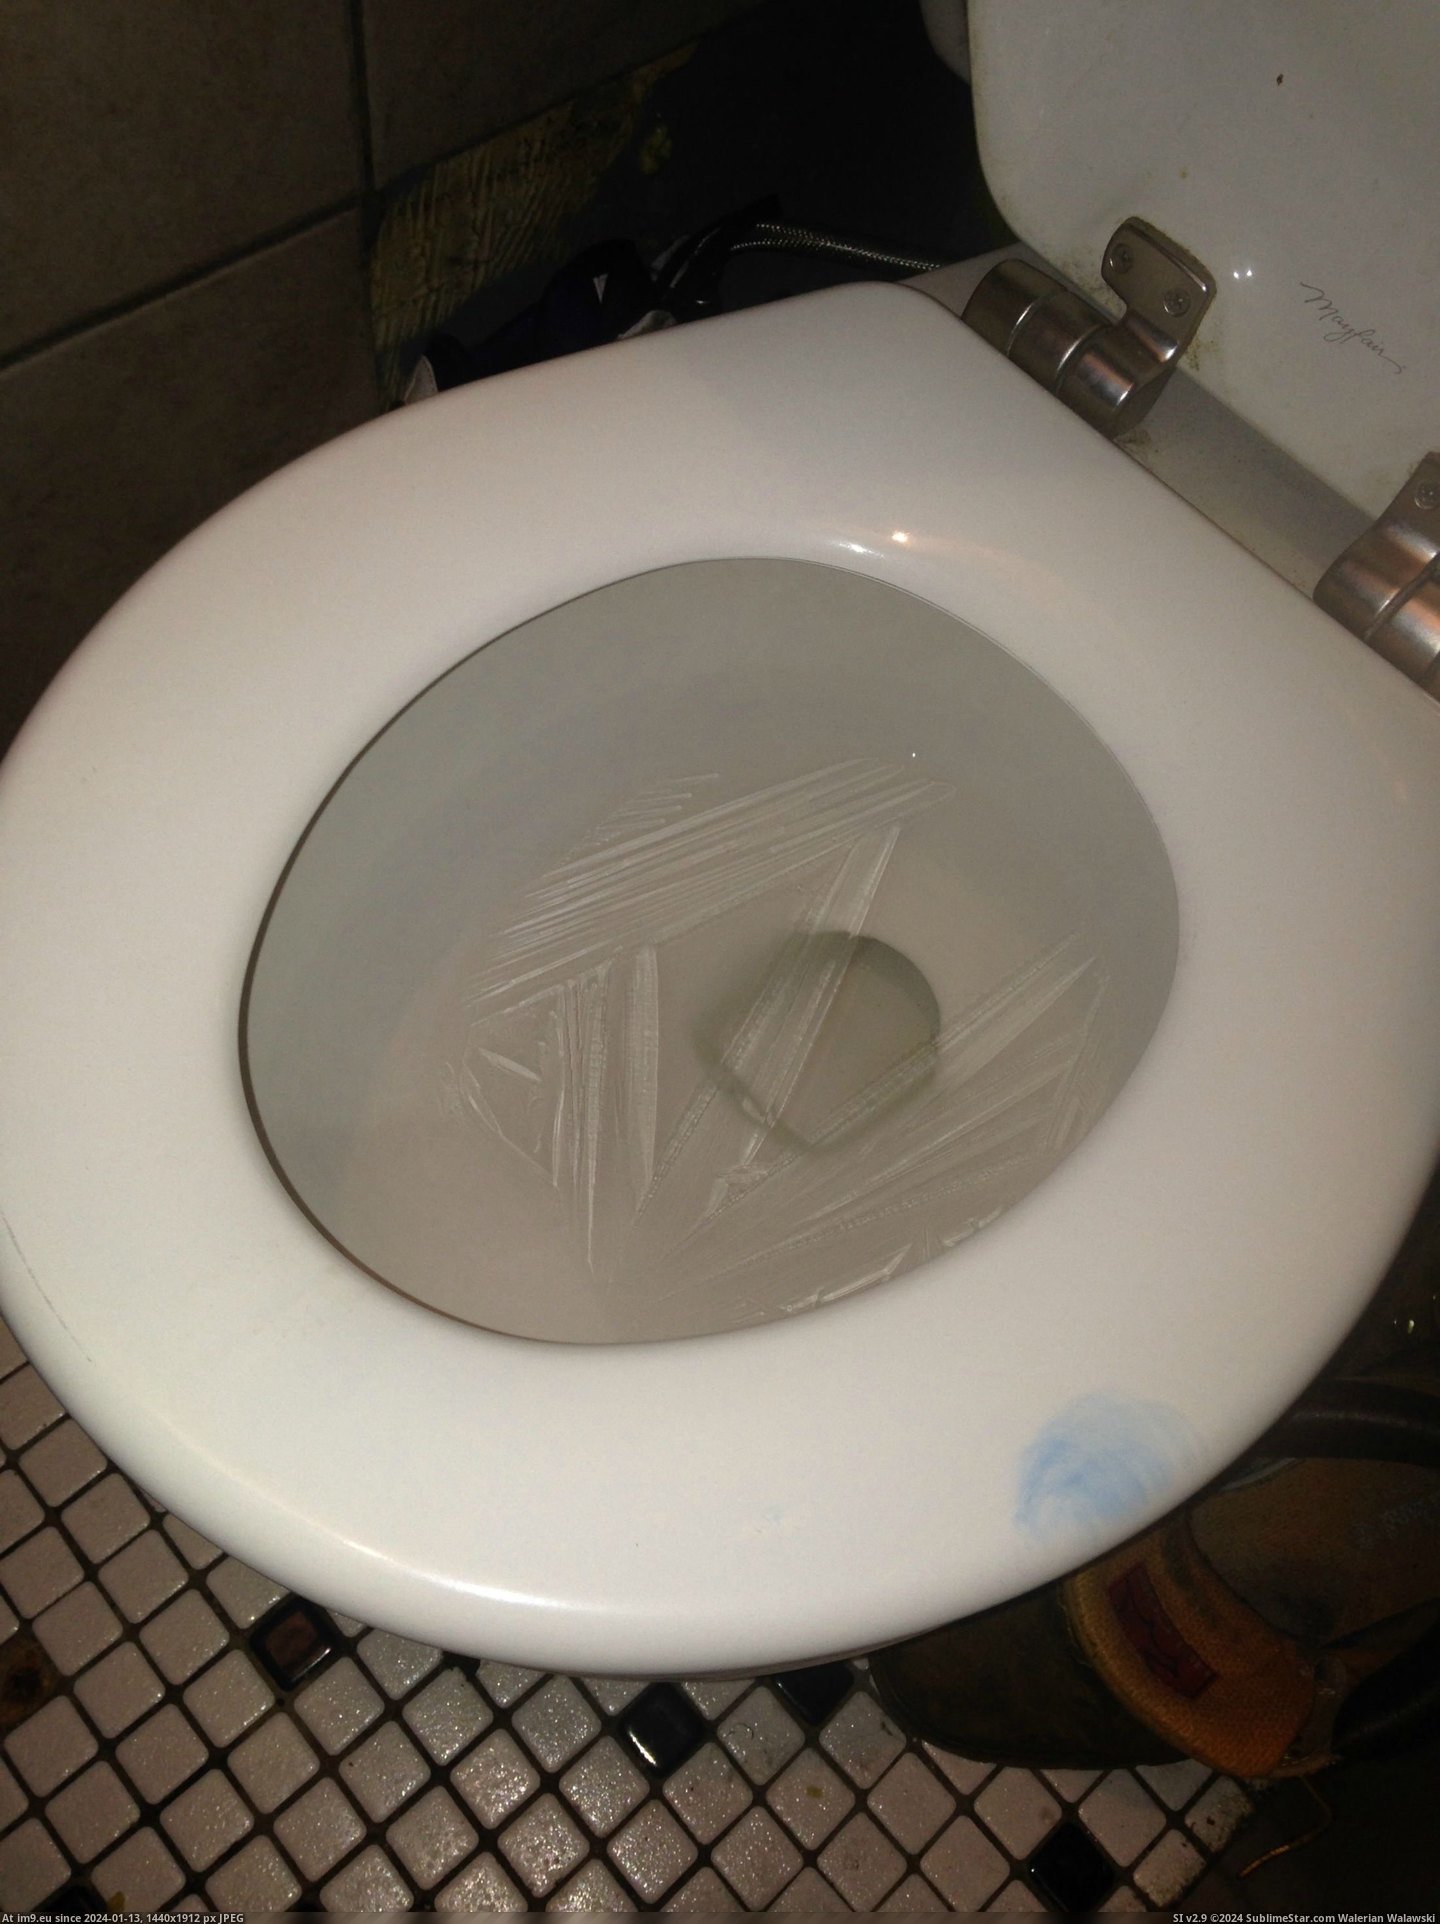 #Work #Water #Toilet #Froze #Bathroom #Cold [Mildlyinteresting] It's so cold in the bathroom at work that the toilet water froze today. Pic. (Изображение из альбом My r/MILDLYINTERESTING favs))